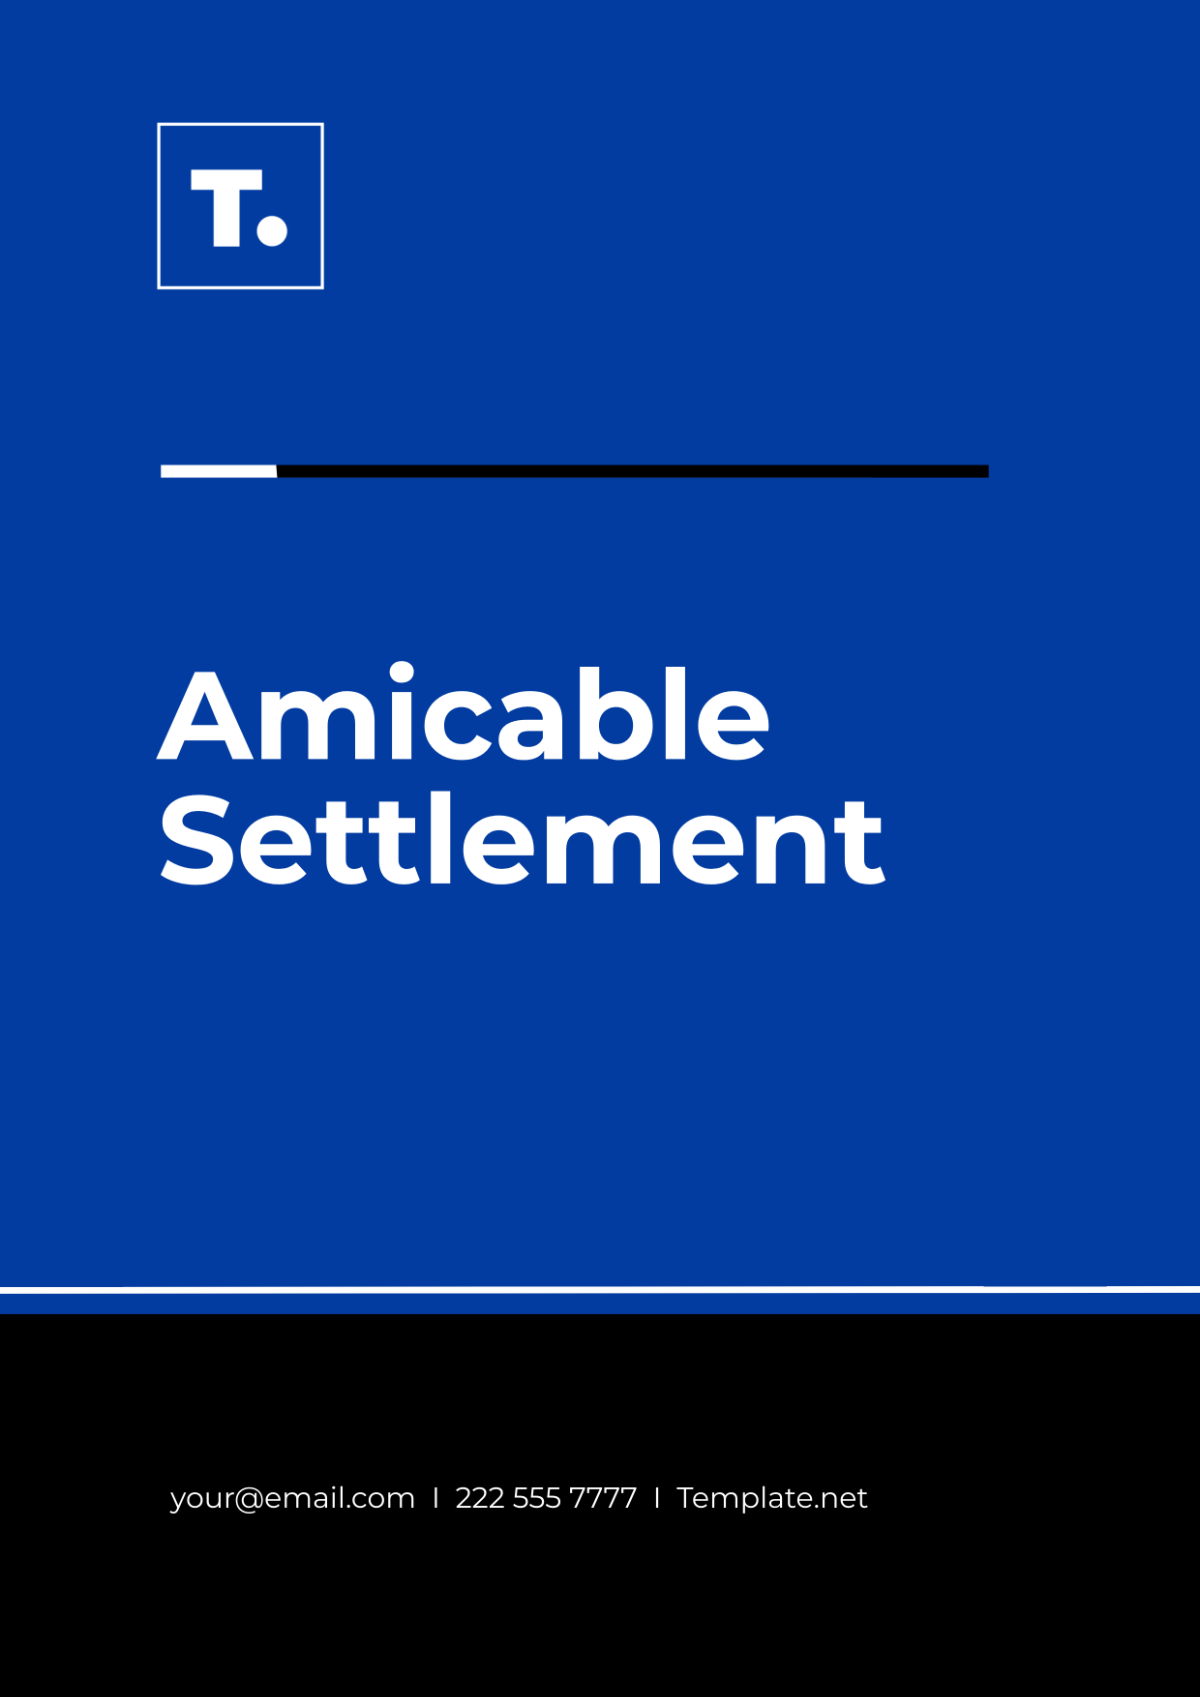 Free Amicable Settlement Template